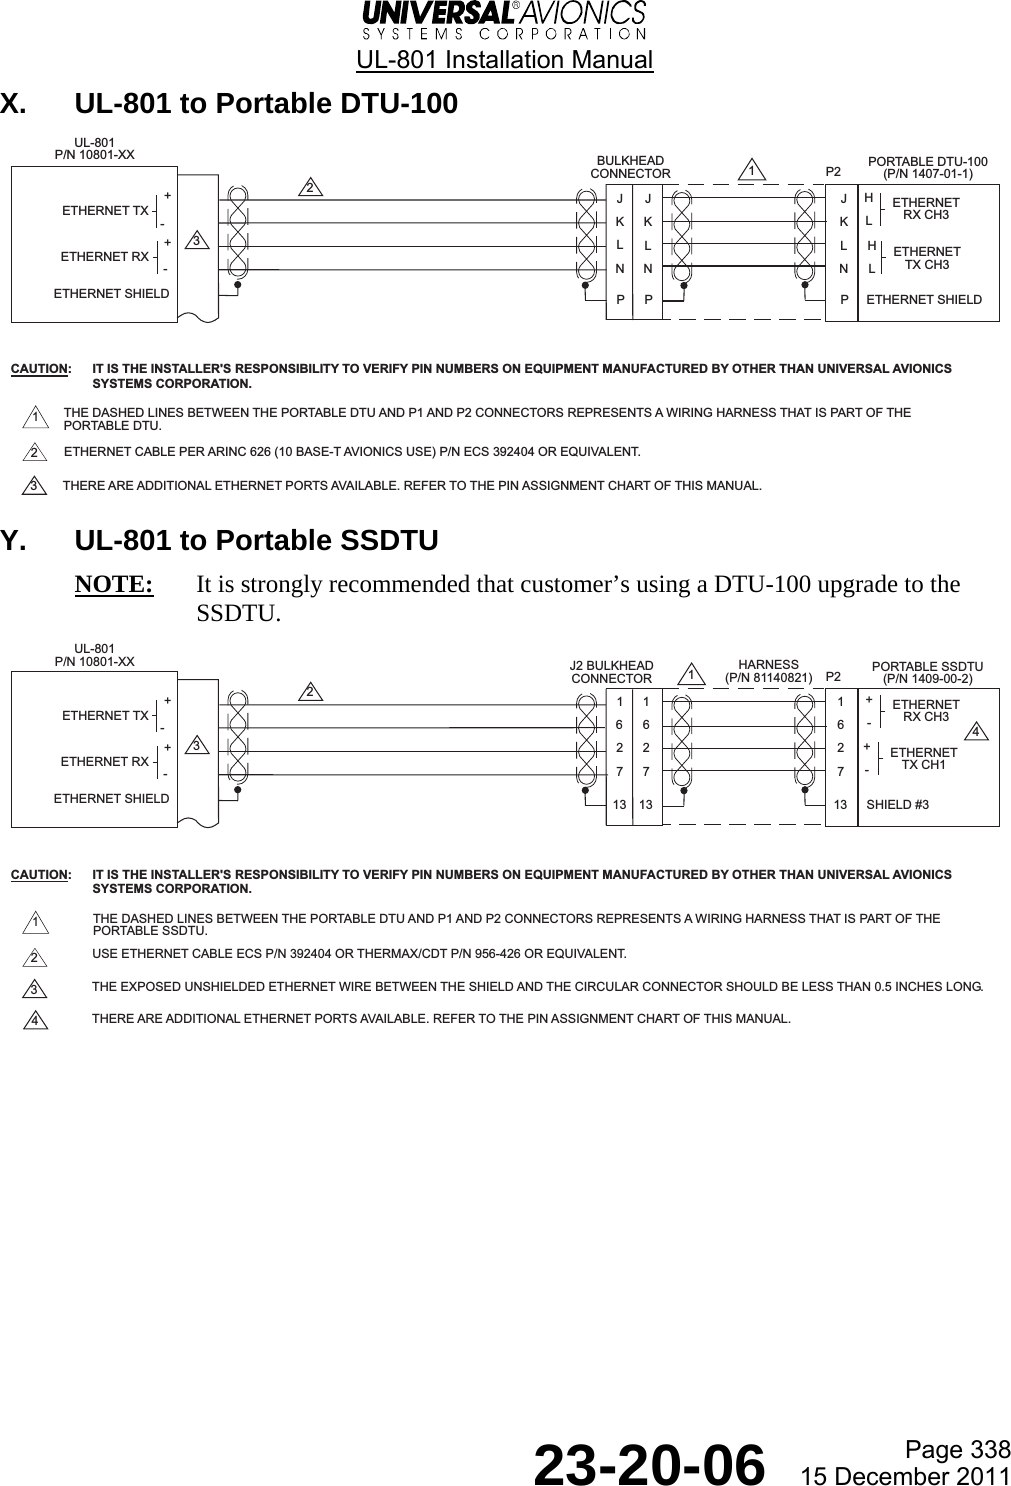  UL-801 Installation Manual  Page 338  23-20-06  15 December 2011 X.  UL-801 to Portable DTU-100  Y.  UL-801 to Portable SSDTU NOTE:  It is strongly recommended that customer’s using a DTU-100 upgrade to the SSDTU.     PORTABLE DTU-100(P/N 1407-01-1)-+-+ETHERNET SHIELD12THE DASHED LINES BETWEEN THE PORTABLE DTU AND P1 AND P2 CONNECTORS REPRESENTS A WIRING HARNESS THAT IS PART OF THEPORTABLE DTU.12ETHERNET CABLE PER ARINC 626 (10 BASE-T AVIONICS USE) P/N ECS 392404 OR EQUIVALENT.CAUTION:  IT IS THE INSTALLER&apos;S RESPONSIBILITY TO VERIFY PIN NUMBERS ON EQUIPMENT MANUFACTURED BY OTHER THAN UNIVERSAL AVIONICS         SYSTEMS CORPORATION.UL-801P/N 10801-XX3ETHERNET RXETHERNET TX KLNJPETHERNETRX CH3HLHLETHERNETTX CH3ETHERNET SHIELDBULKHEADCONNECTOR P2KLNJPKLNJPTHERE ARE ADDITIONAL ETHERNET PORTS AVAILABLE. REFER TO THE PIN ASSIGNMENT CHART OF THIS MANUAL.362716271PORTABLE SSDTU(P/N 1409-00-2)-+-+ETHERNET SHIELD12THE DASHED LINES BETWEEN THE PORTABLE DTU AND P1 AND P2 CONNECTORS REPRESENTS A WIRING HARNESS THAT IS PART OF THEPORTABLE SSDTU.12USE ETHERNET CABLE ECS P/N 392404 OR THERMAX/CDT P/N 956-426 OR EQUIVALENT.CAUTION:  IT IS THE INSTALLER&apos;S RESPONSIBILITY TO VERIFY PIN NUMBERS ON EQUIPMENT MANUFACTURED BY OTHER THAN UNIVERSAL AVIONICS         SYSTEMS CORPORATION.UL-801P/N 10801-XX334THE EXPOSED UNSHIELDED ETHERNET WIRE BETWEEN THE SHIELD AND THE CIRCULAR CONNECTOR SHOULD BE LESS THAN 0.5 INCHES LONG.THERE ARE ADDITIONAL ETHERNET PORTS AVAILABLE. REFER TO THE PIN ASSIGNMENT CHART OF THIS MANUAL.ETHERNET RXETHERNET TX13 13ETHERNETRX CH3+-+-ETHERNETTX CH16271SHIELD #3413J2 BULKHEADCONNECTORHARNESS(P/N 81140821) P2